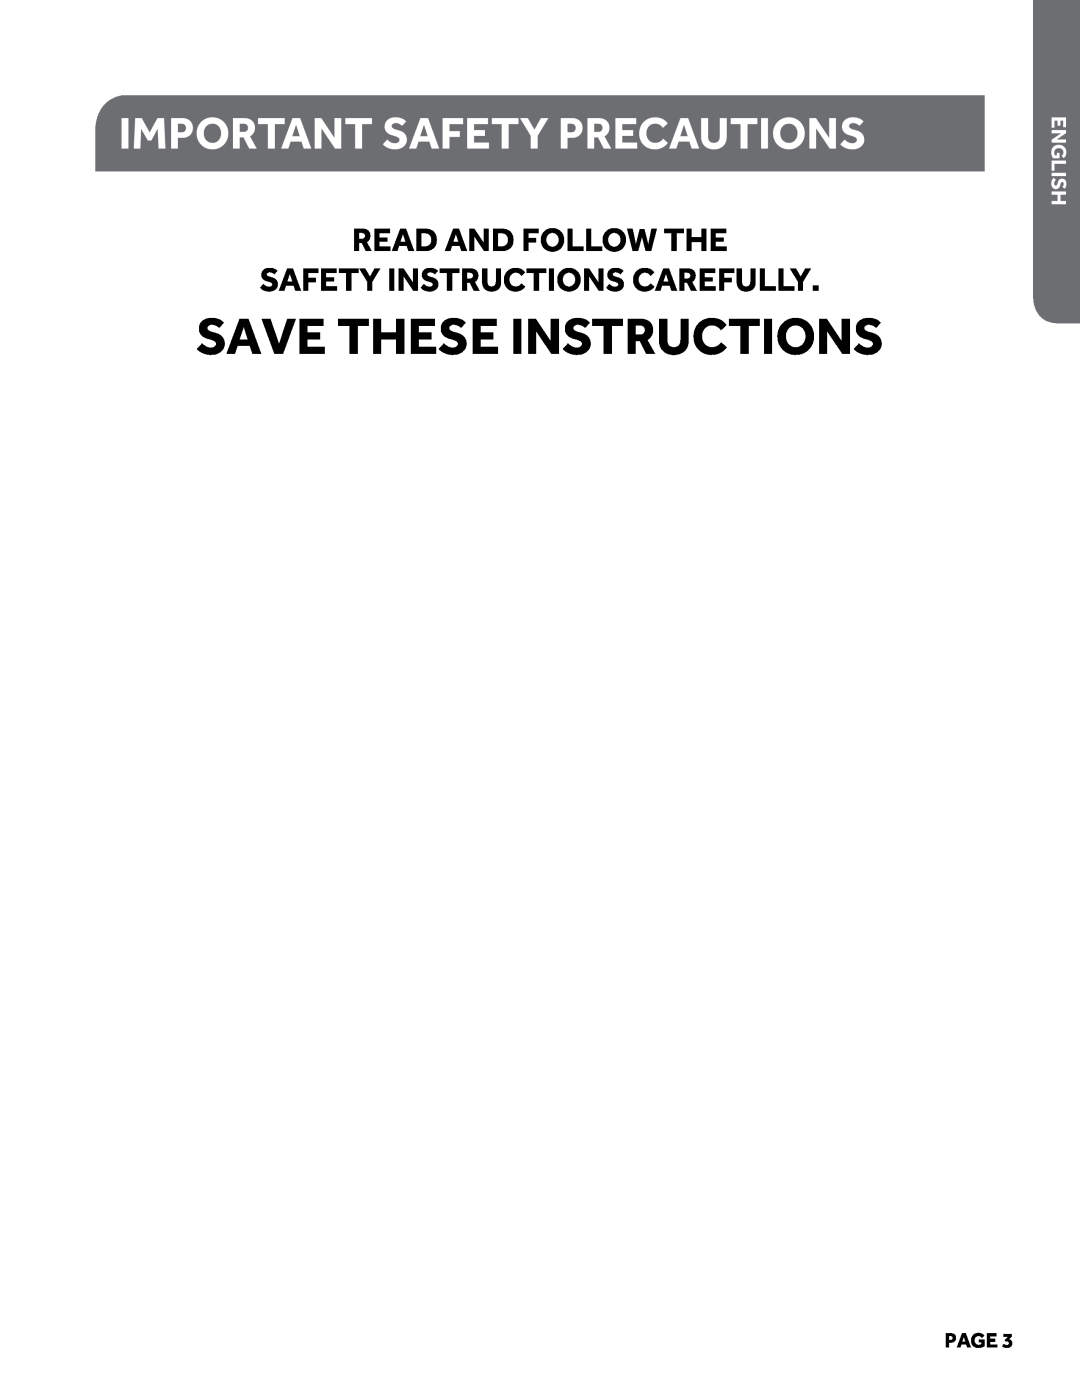 Haier HPY08XCM Save These Instructions, READ and FOLLOW THE SAFETY INSTRUCTIONS CAREFULLY, Important safety precautions 